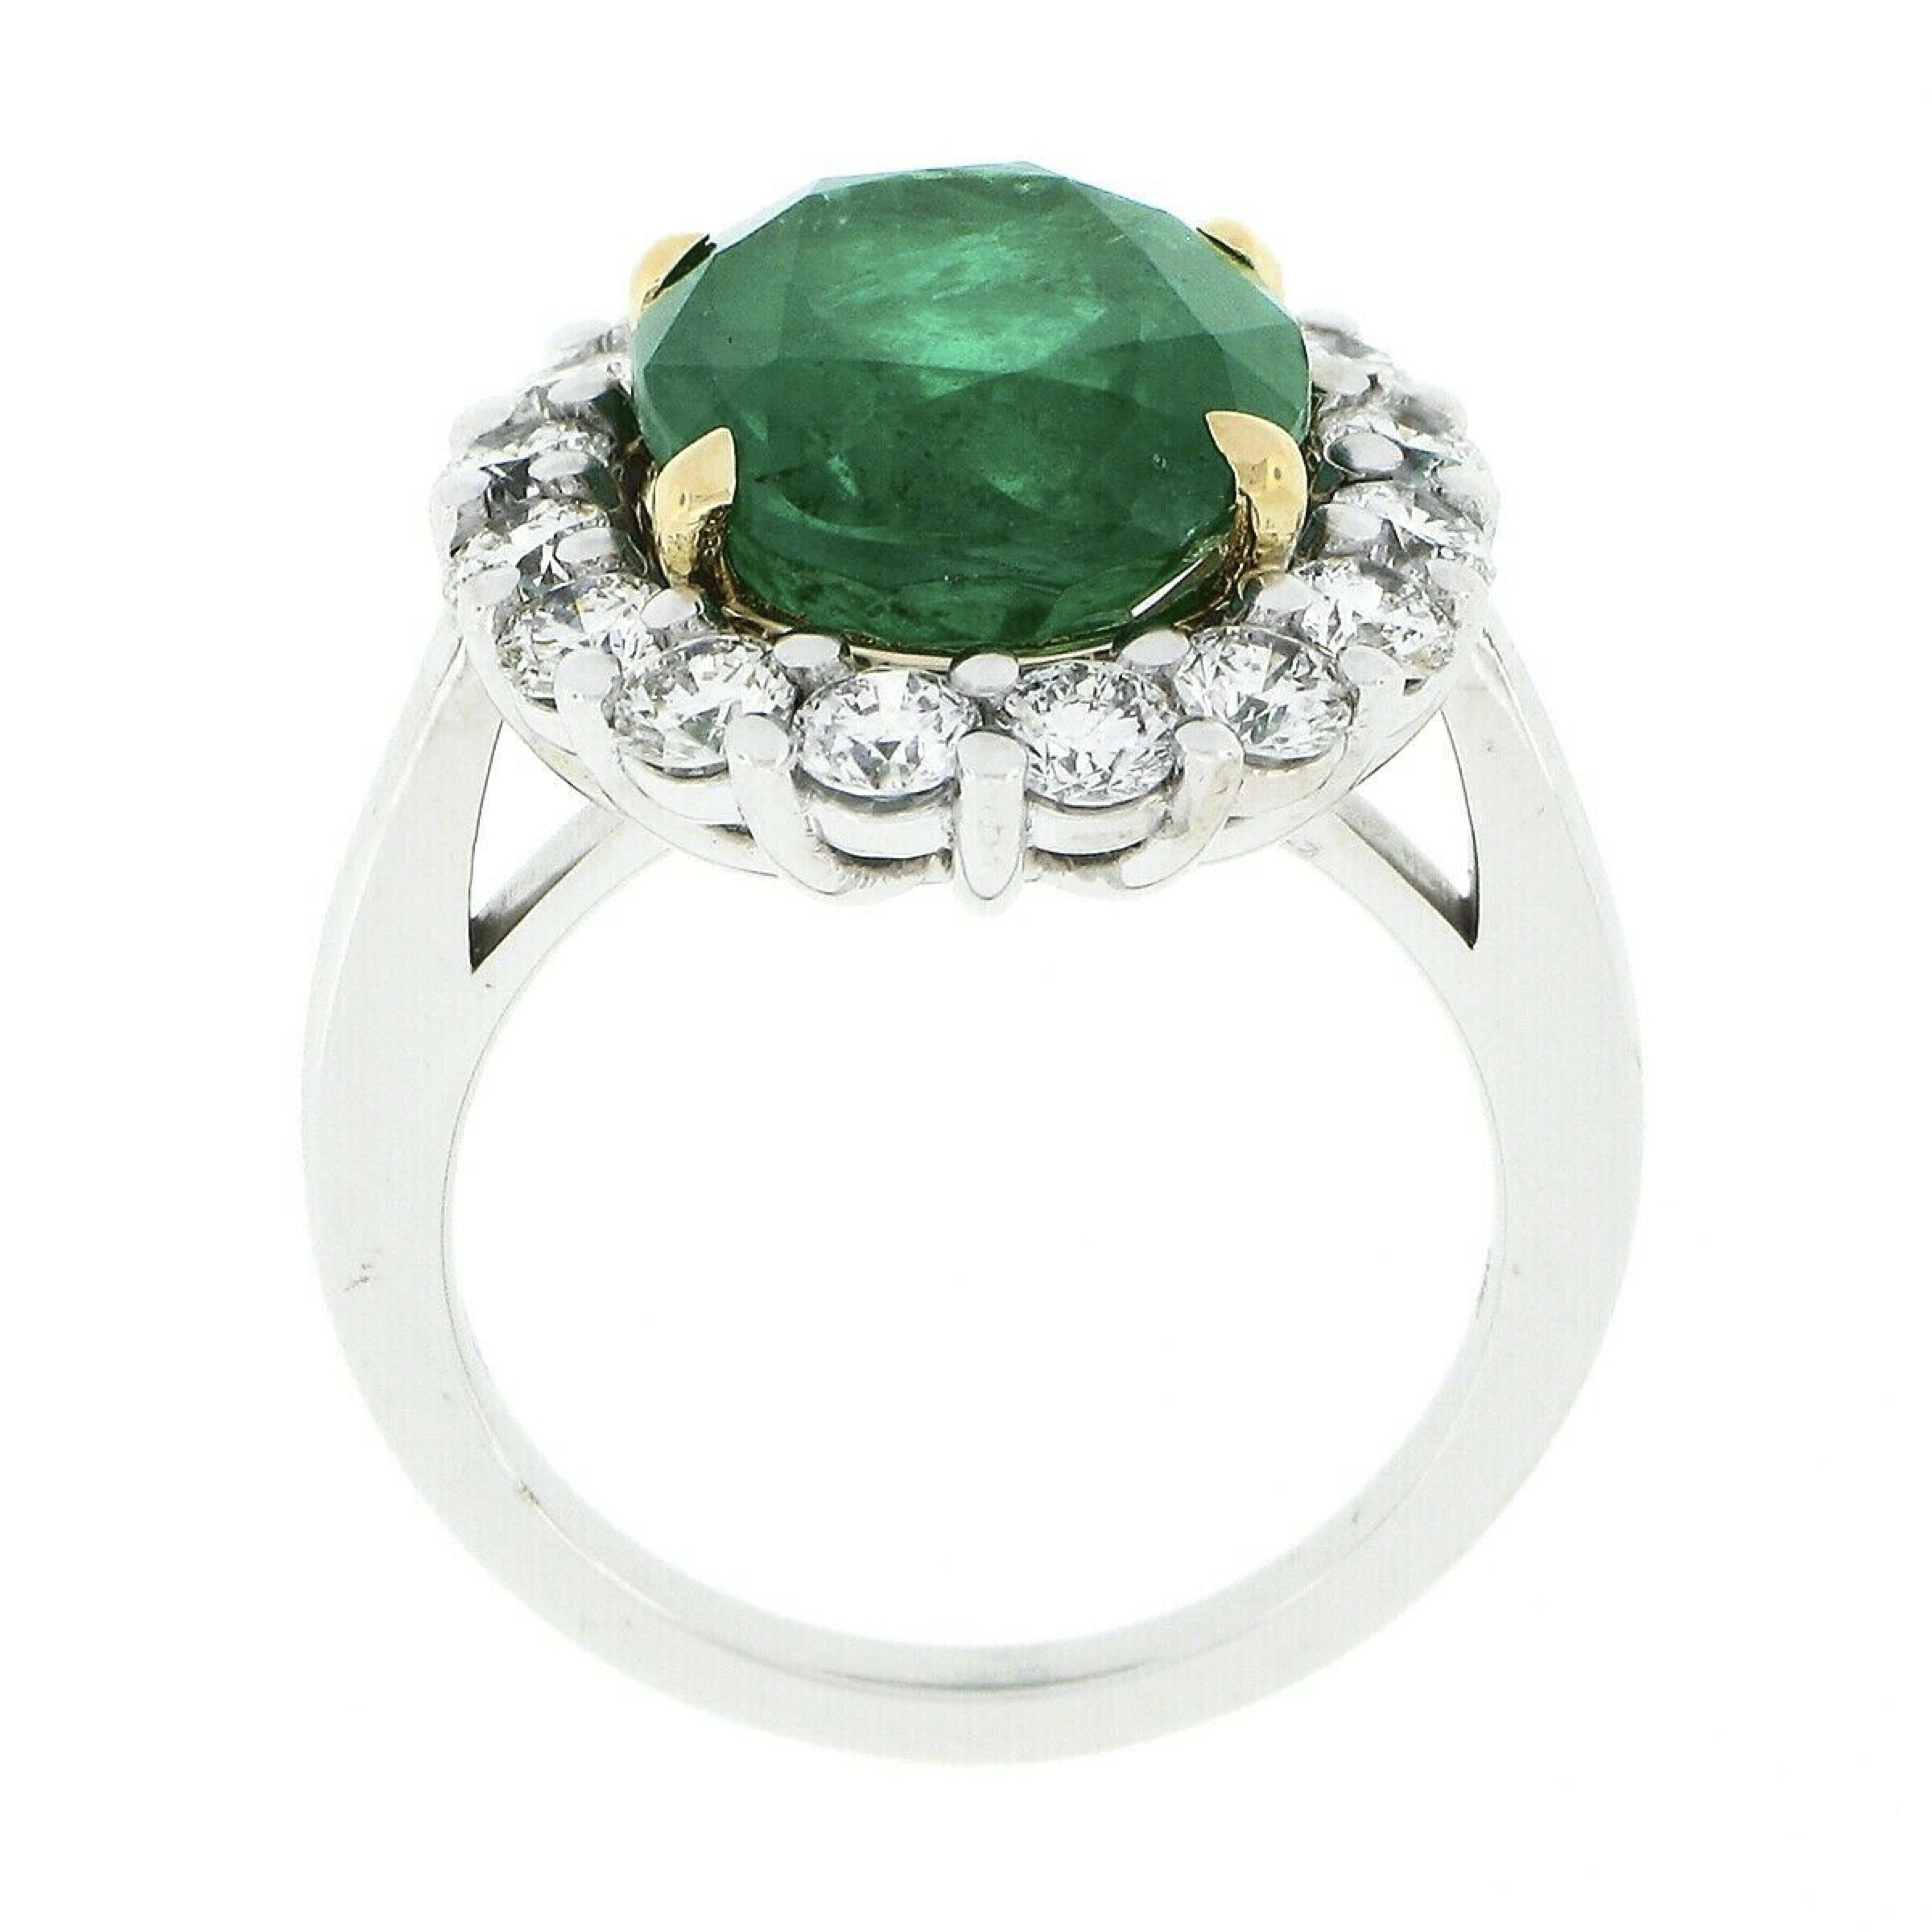 New 18k TT Gold 7.94ct GIA Oval Emerald w/ Diamond Halo Engagement Cocktail Ring 4